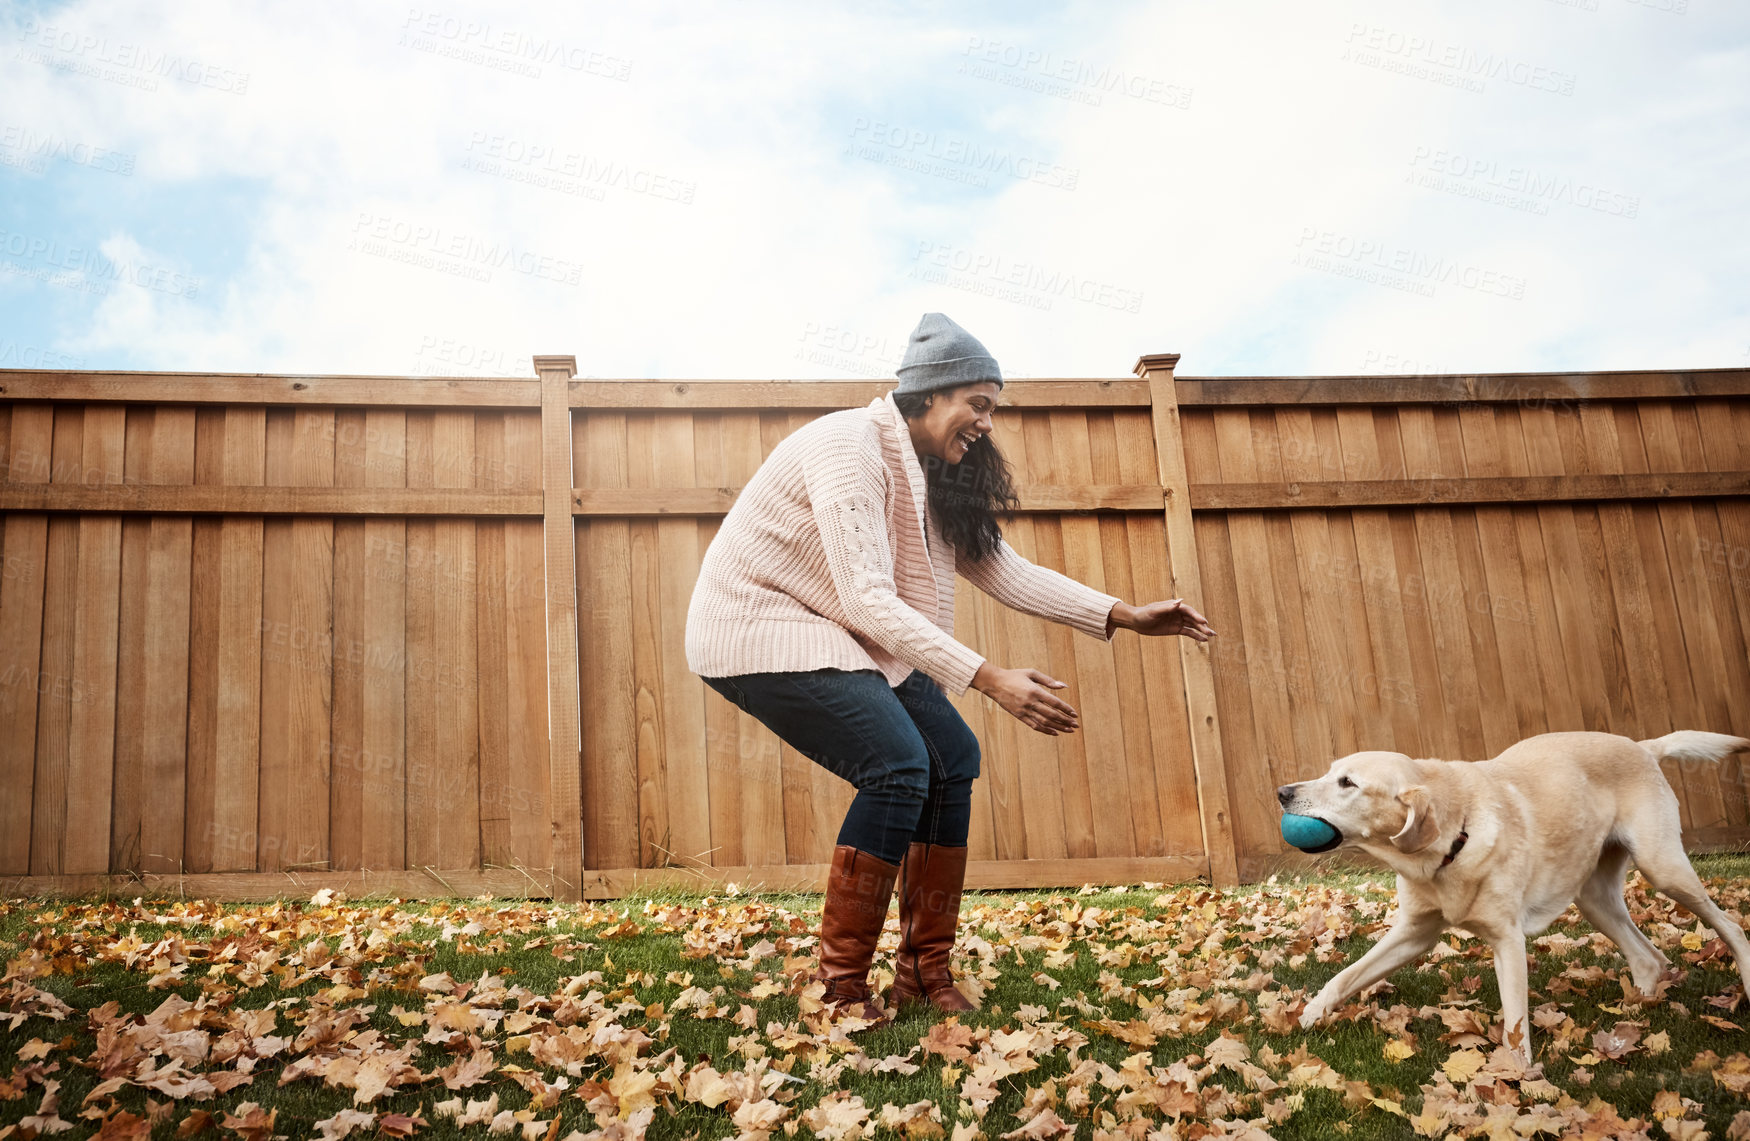 Buy stock photo Shot of a young woman playing with her dog outside